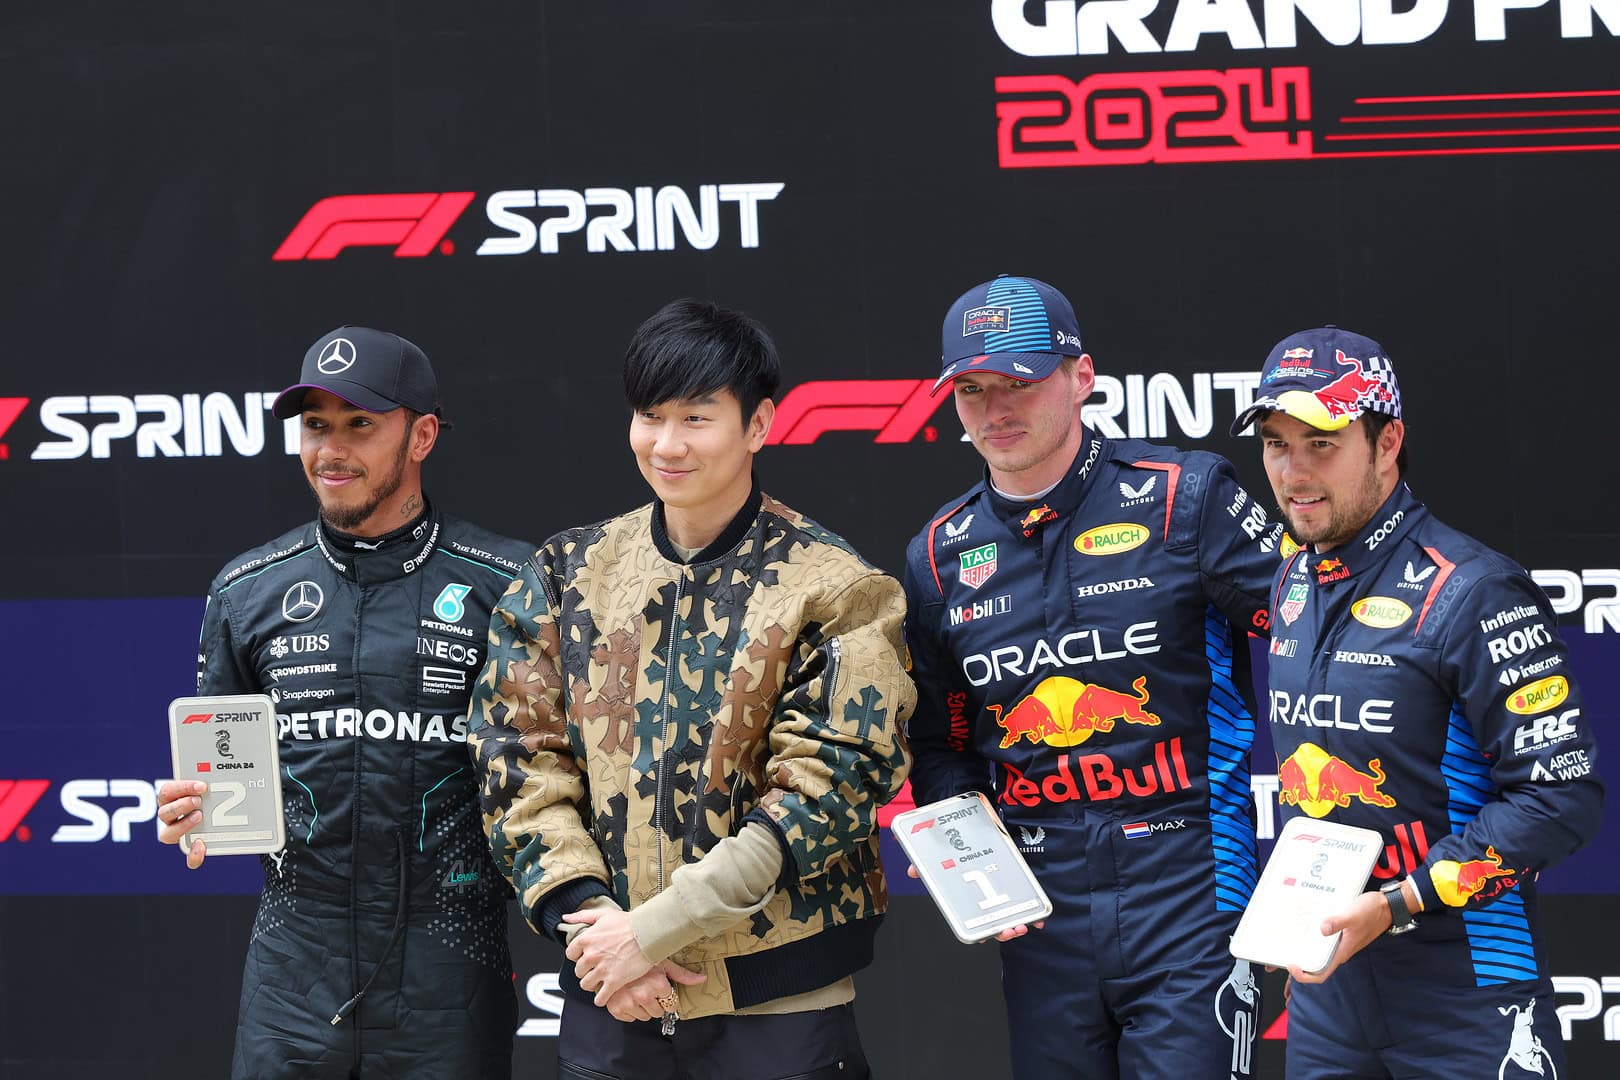 Sprint Podium Overshadowed By Qualifying Disaster For Lewis Hamilton